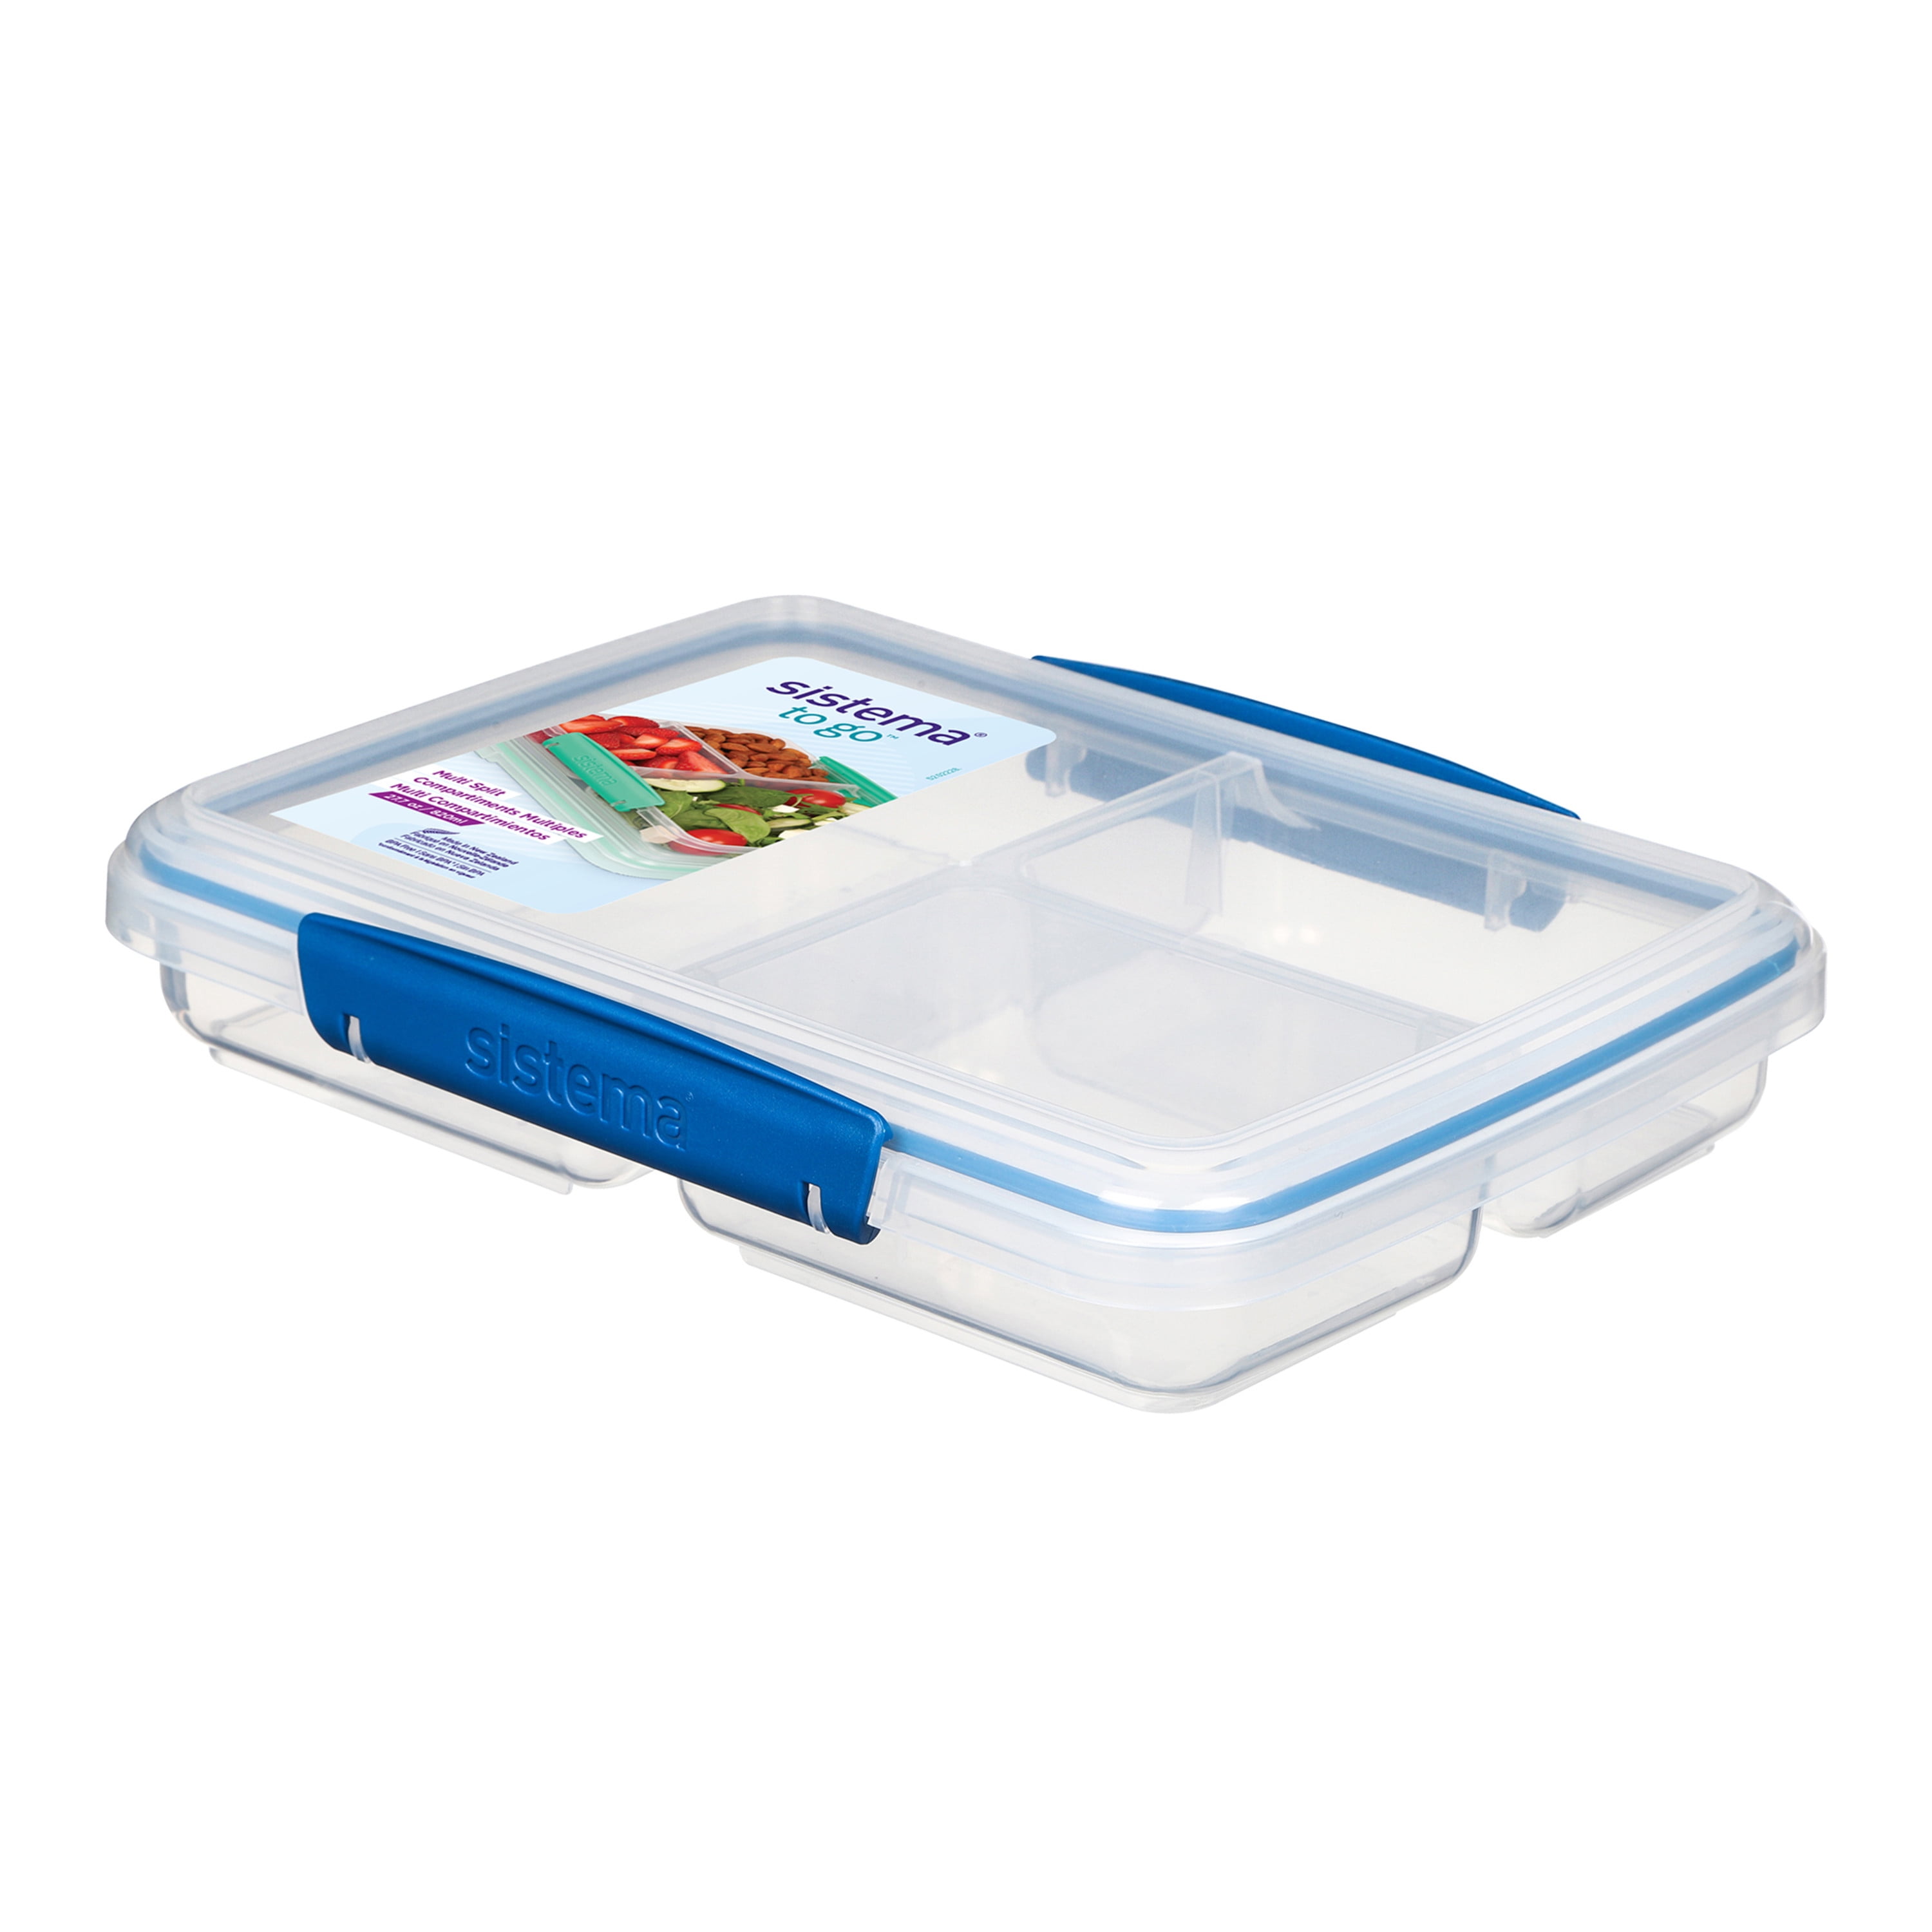 Sistema Food Containers